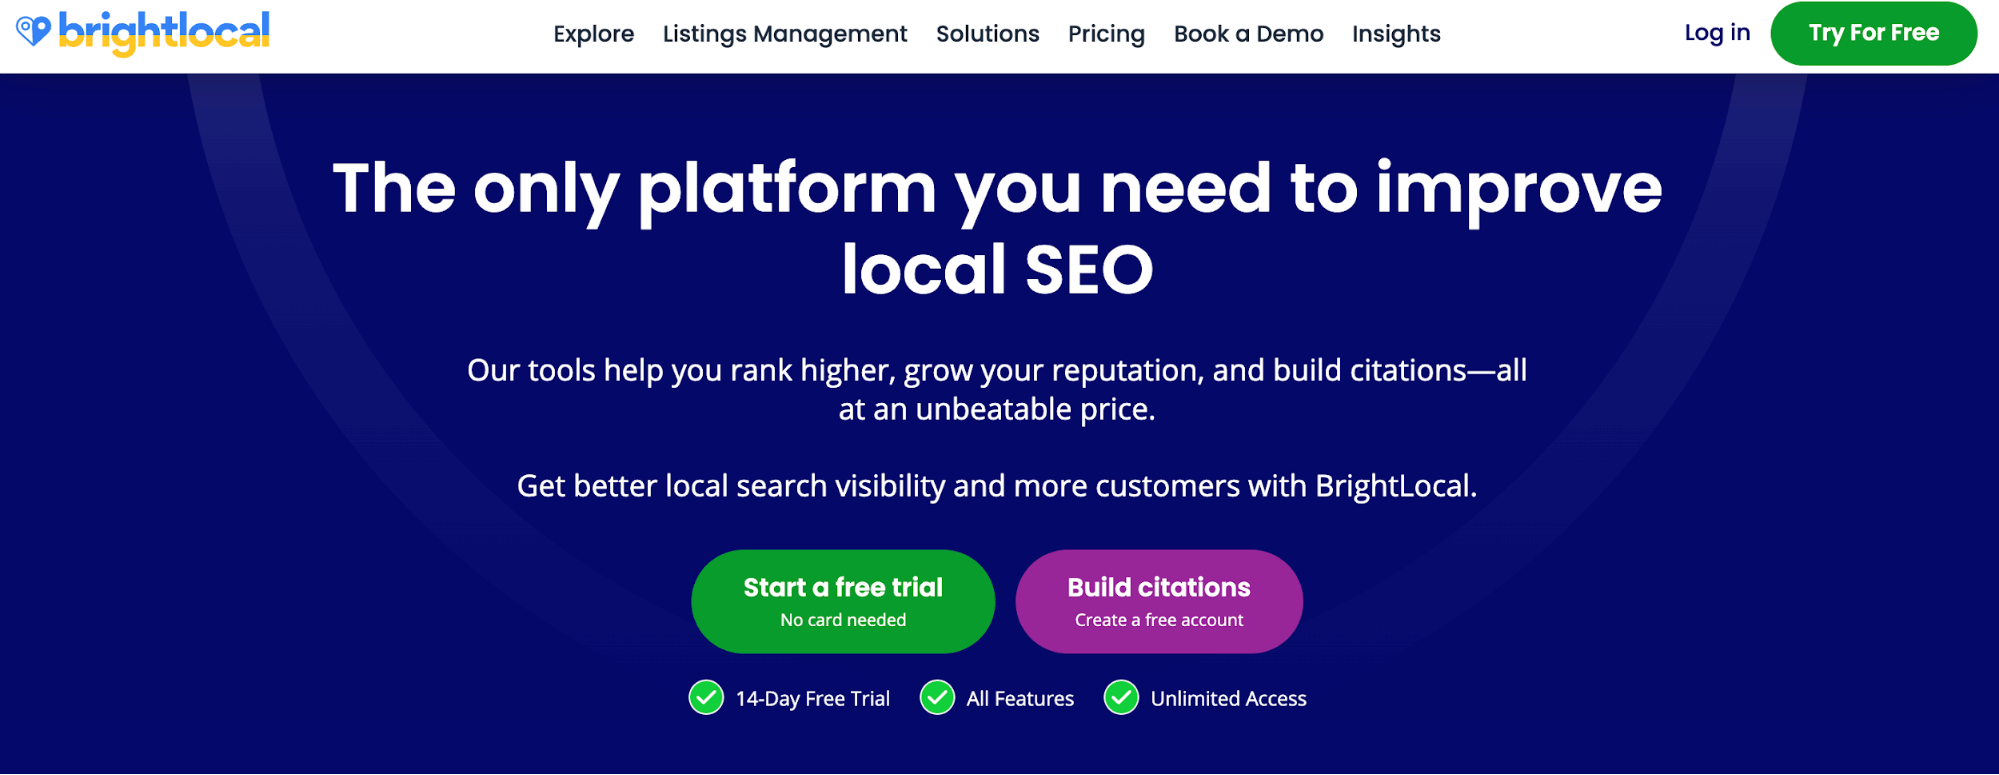 Brightlocal homepage with blue background and the motto: the only platform you need to improve local SEO